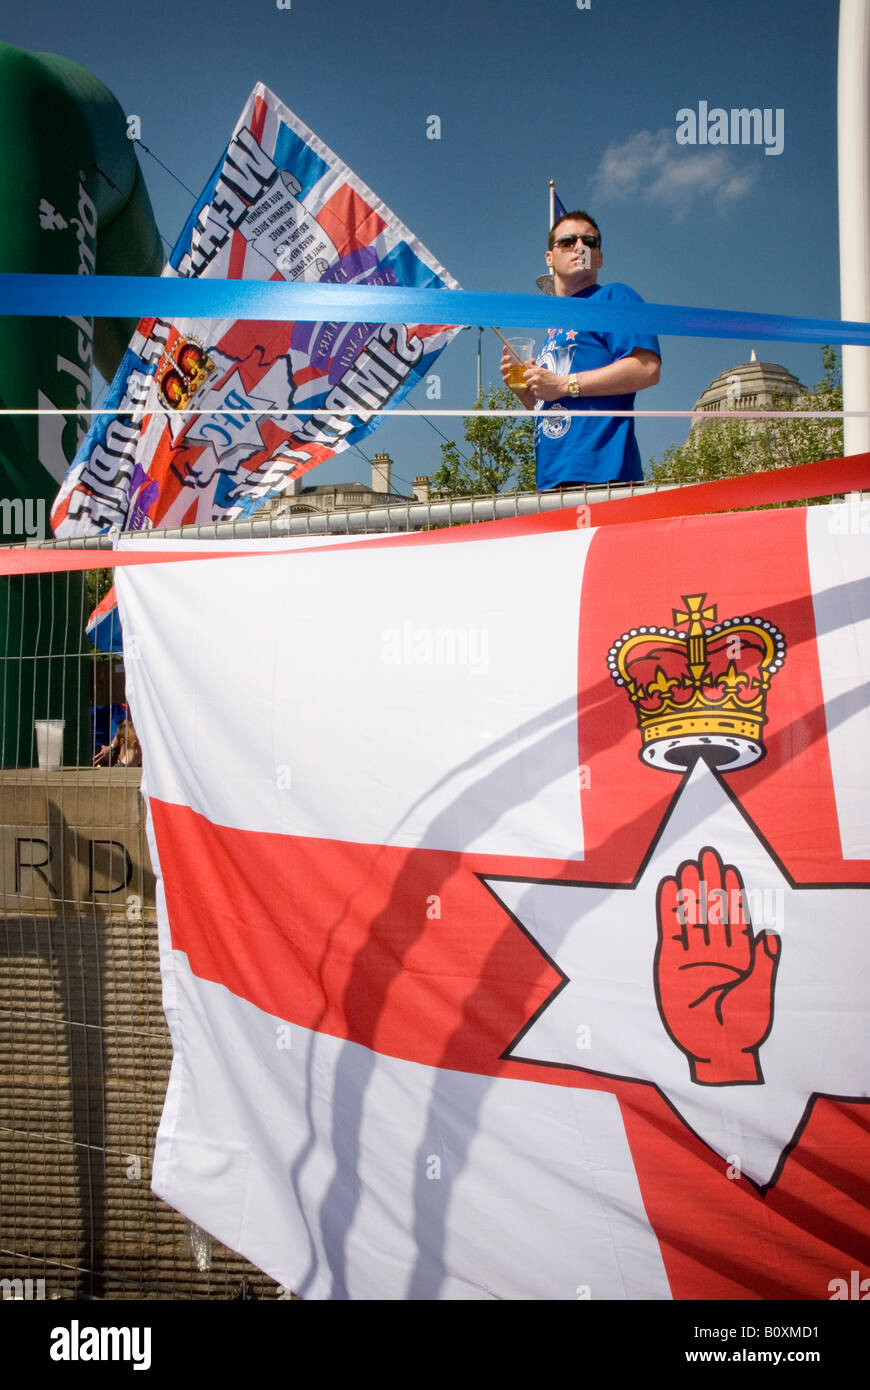 Glasgow Rangers fan with Union Jack flag standing behind an Ulster red hand flag, in Manchester UEFA Cup Final 14th May 2008 Stock Photo